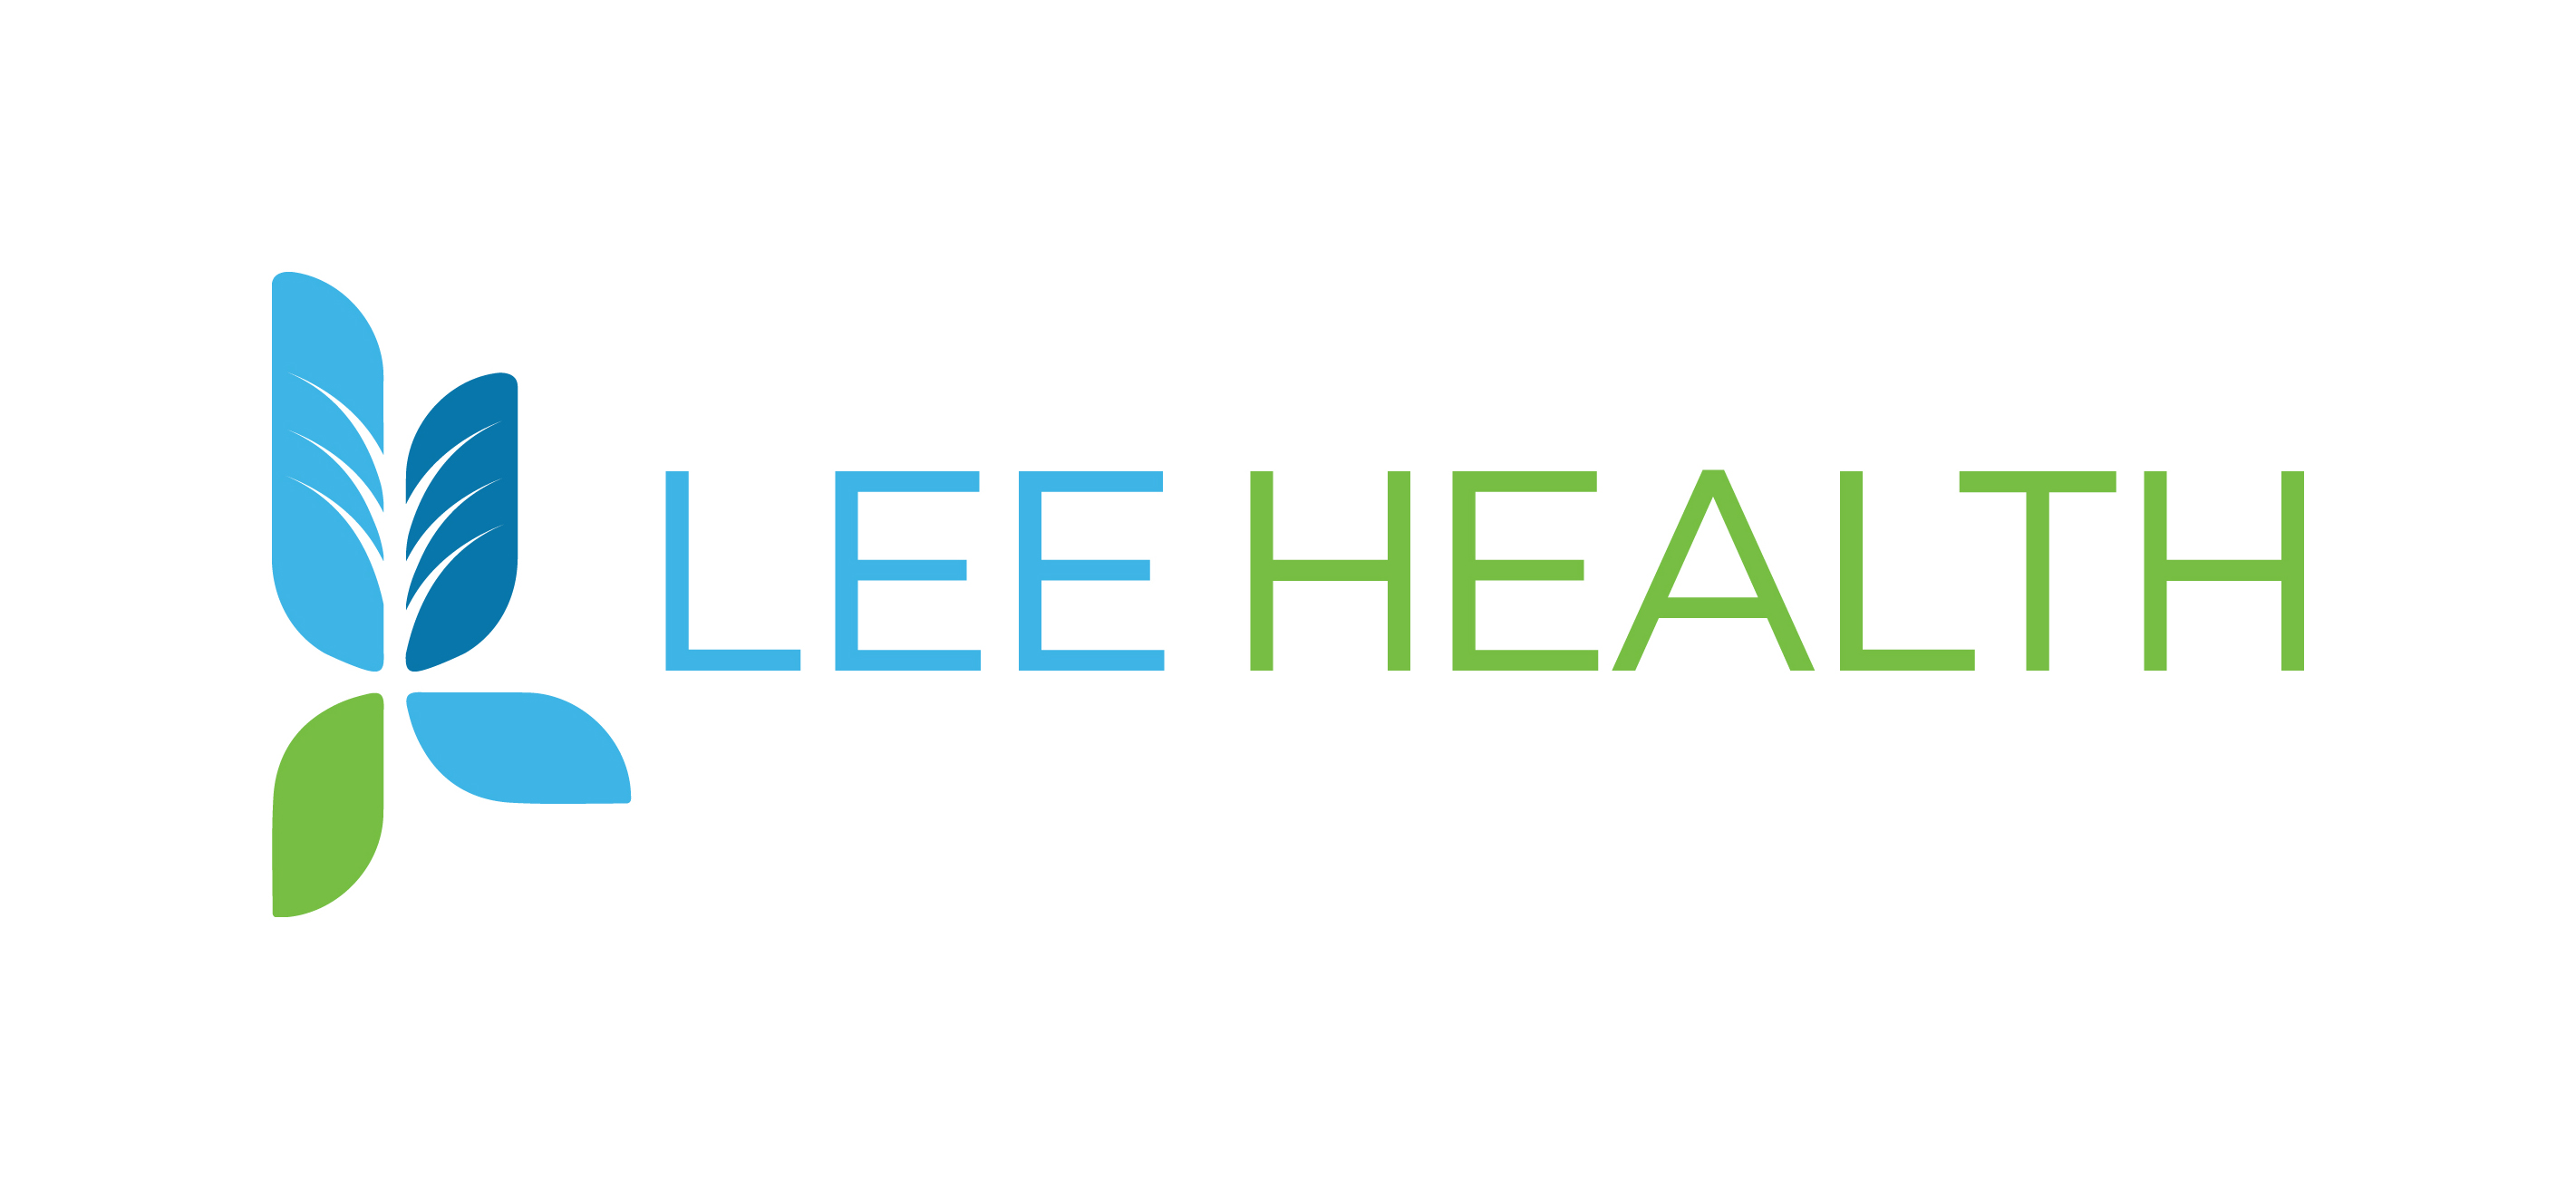 Lee Health Announces Plans for New Hospital Campus in Fort